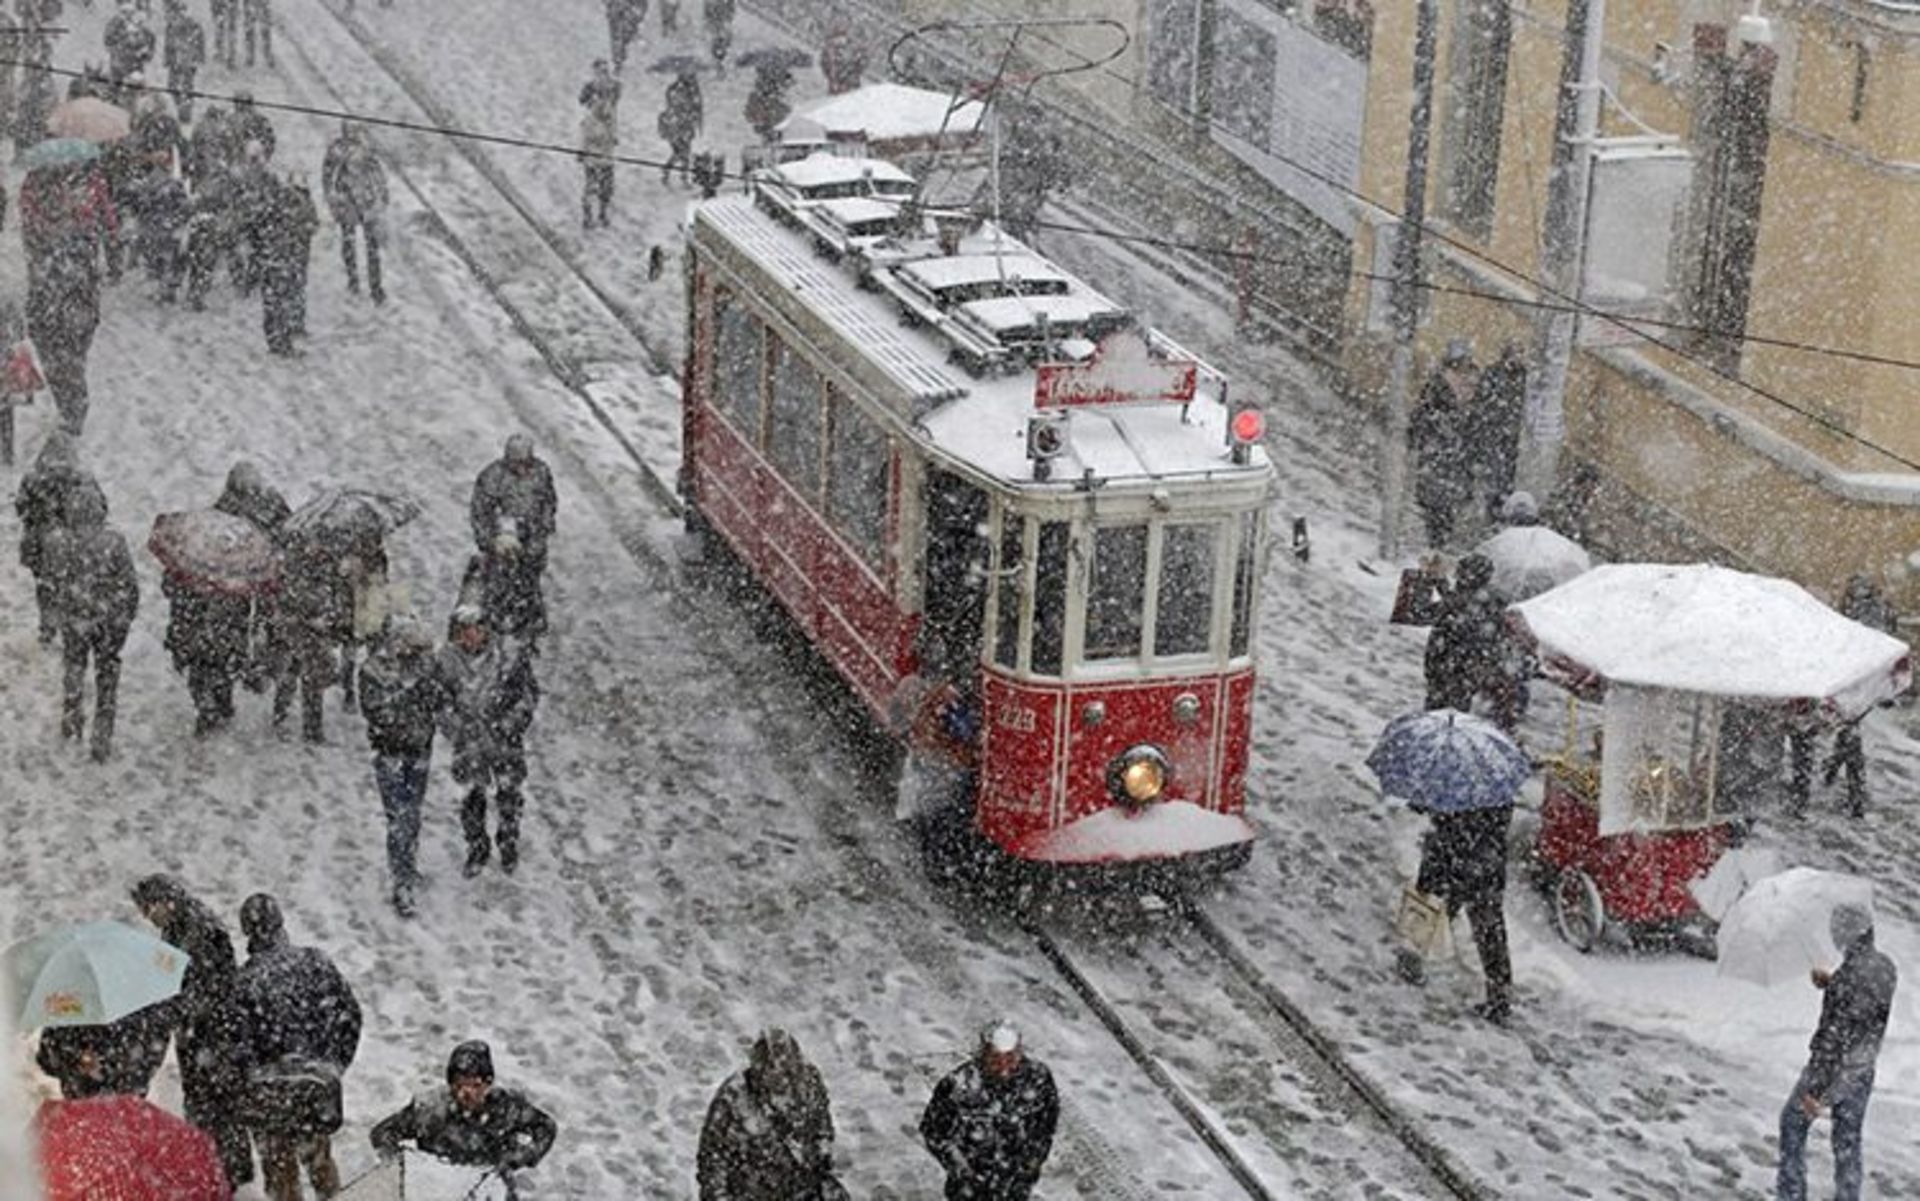 18 people brave the cold and snow as they walk in the main pedestrian street of istiklal in central istanbul s 50b49